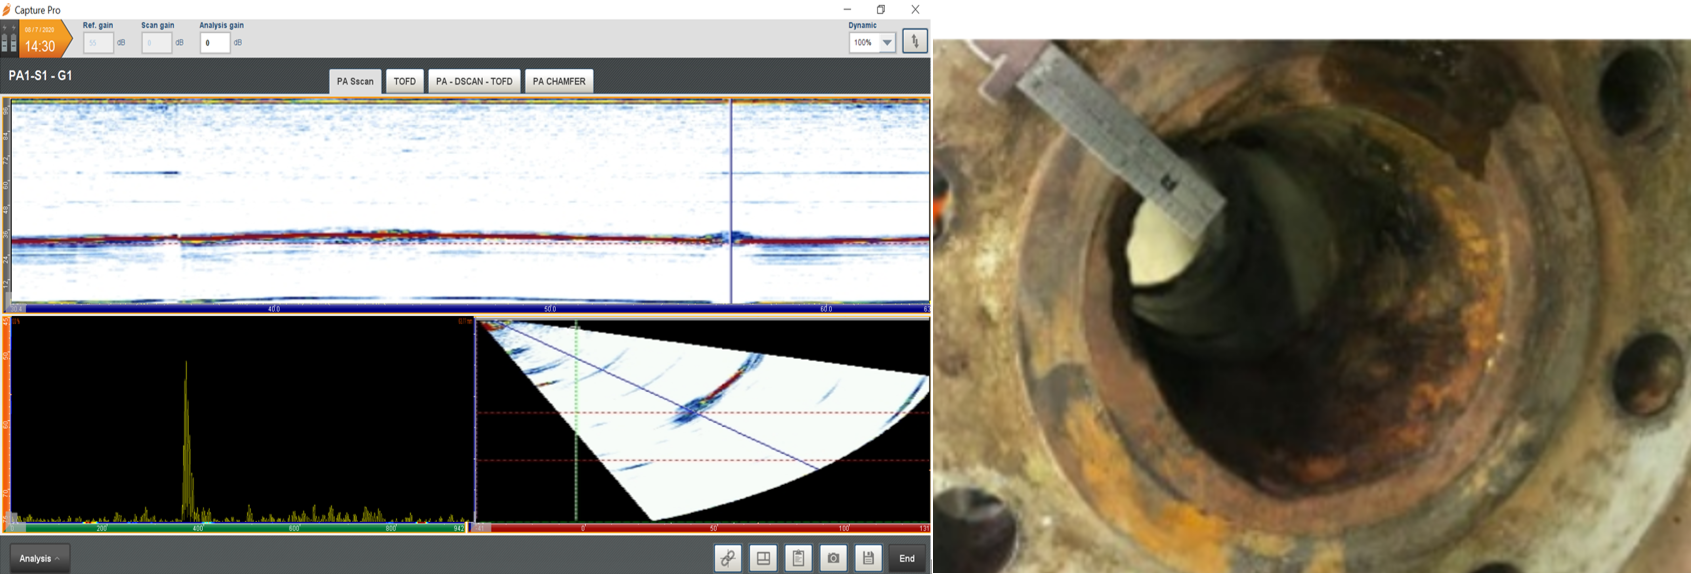 Analysis of flange face corner and the change in response on the encoded scan left and typical corner corrosion being physically measured right